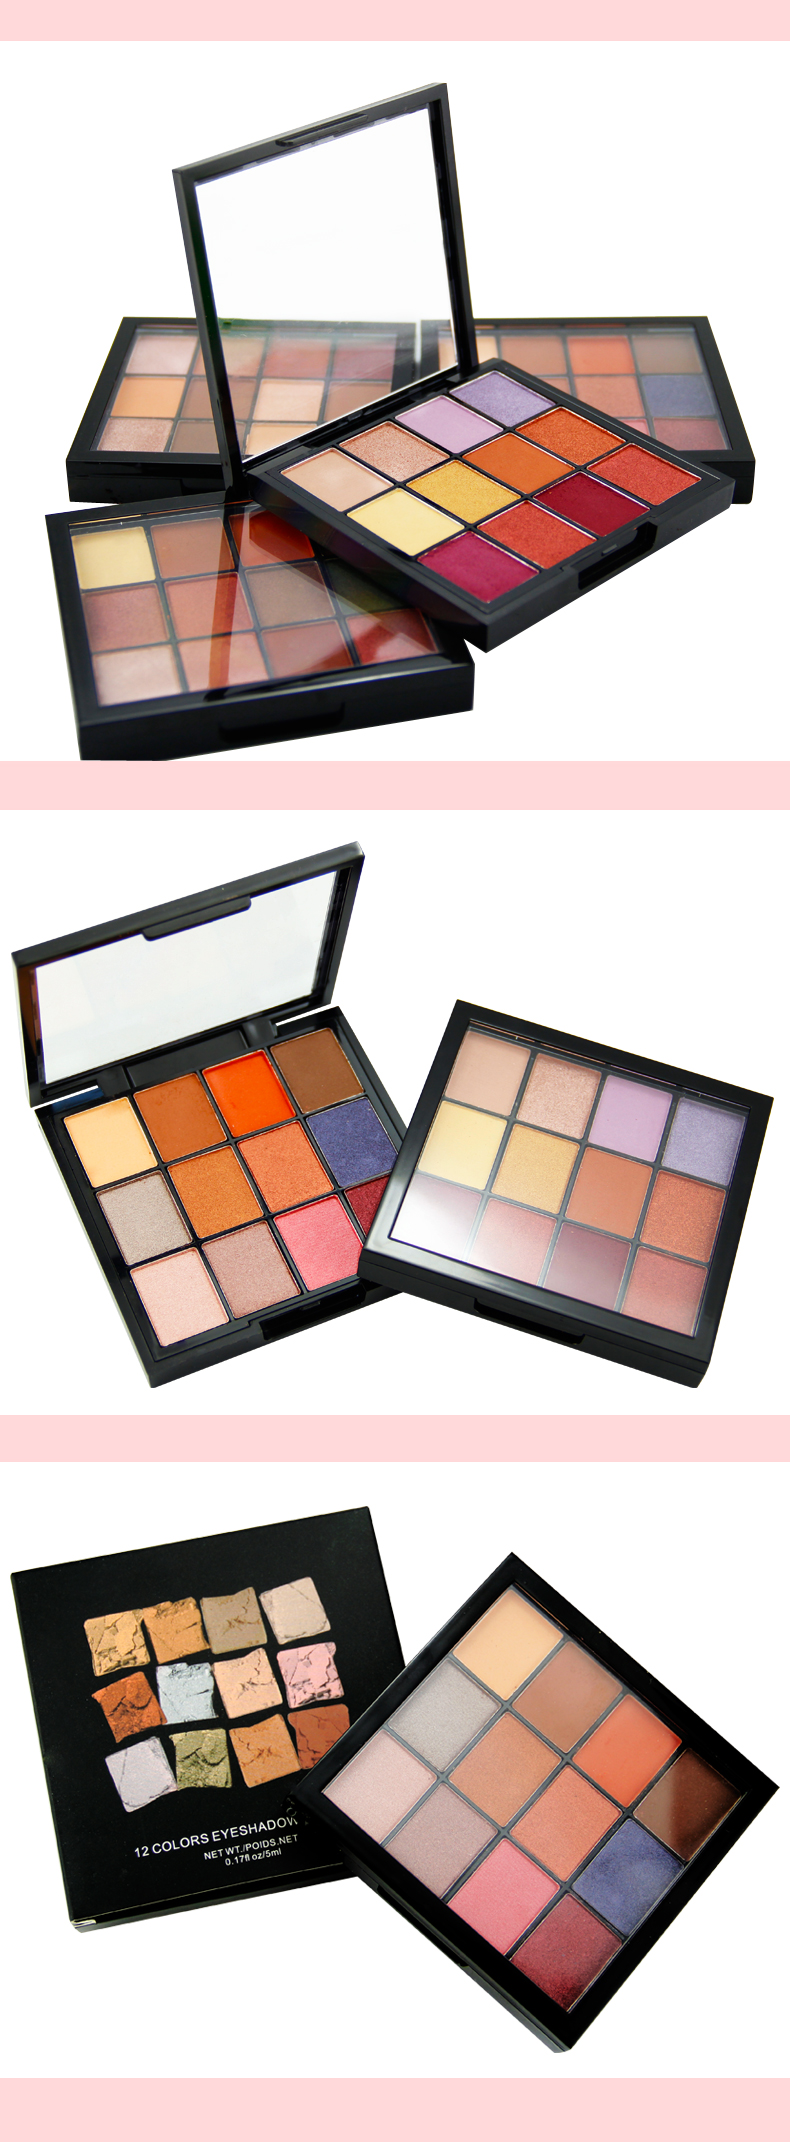 New arrival Professional Custom Eye Makeup Multicolored Matte And Shiny Eyeshadow Palette High Pigment Eyeshadow